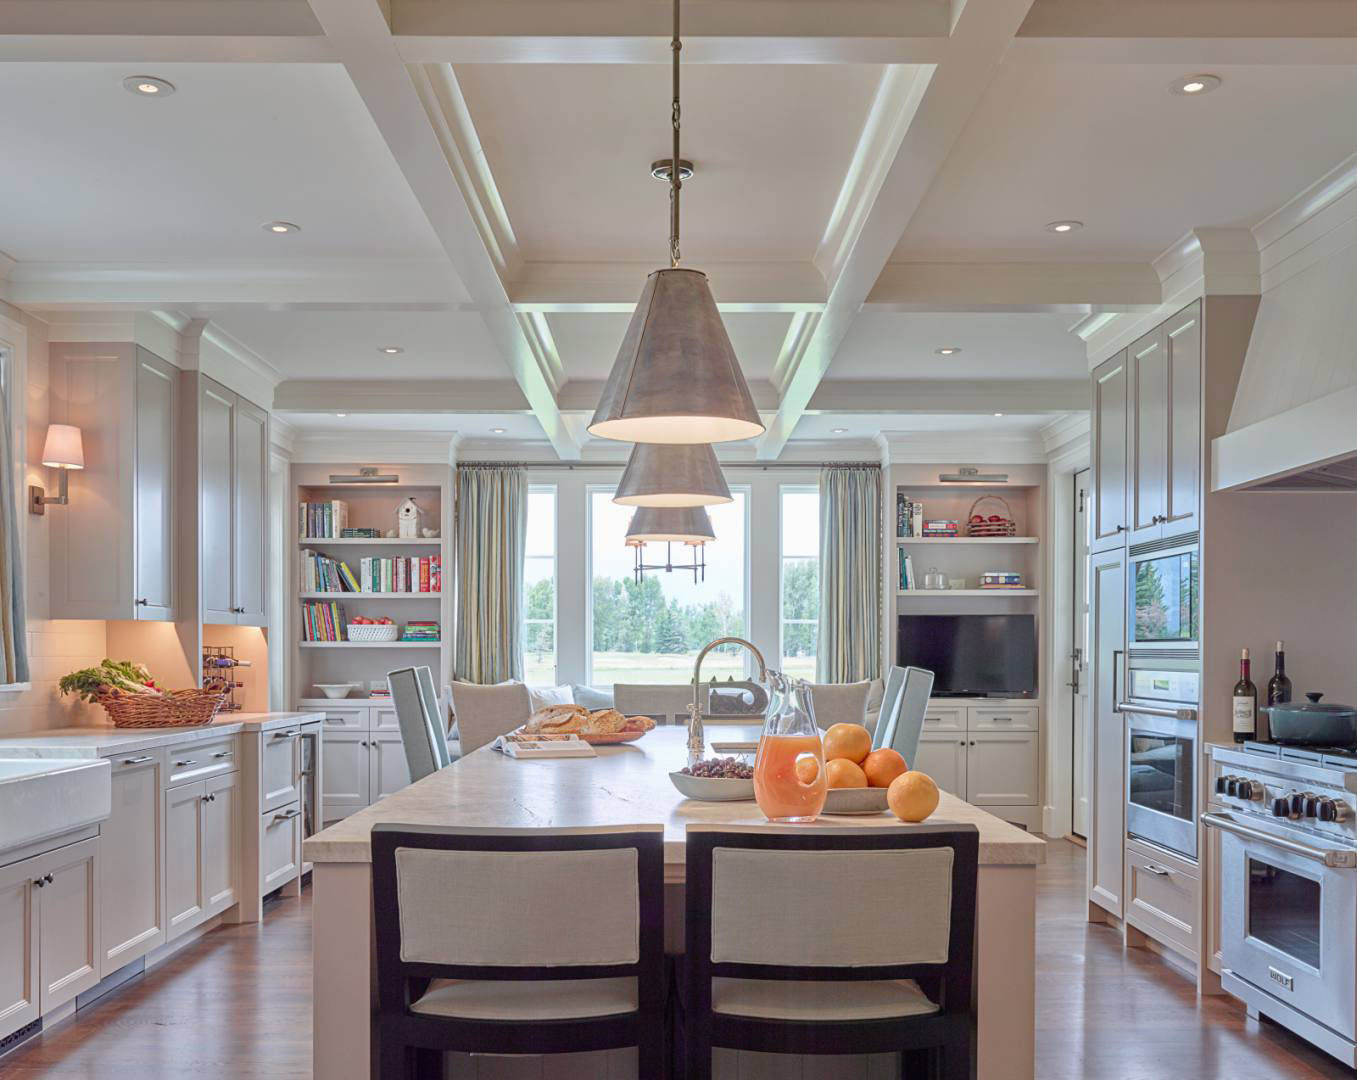 Contemporary Country Kitchen Design